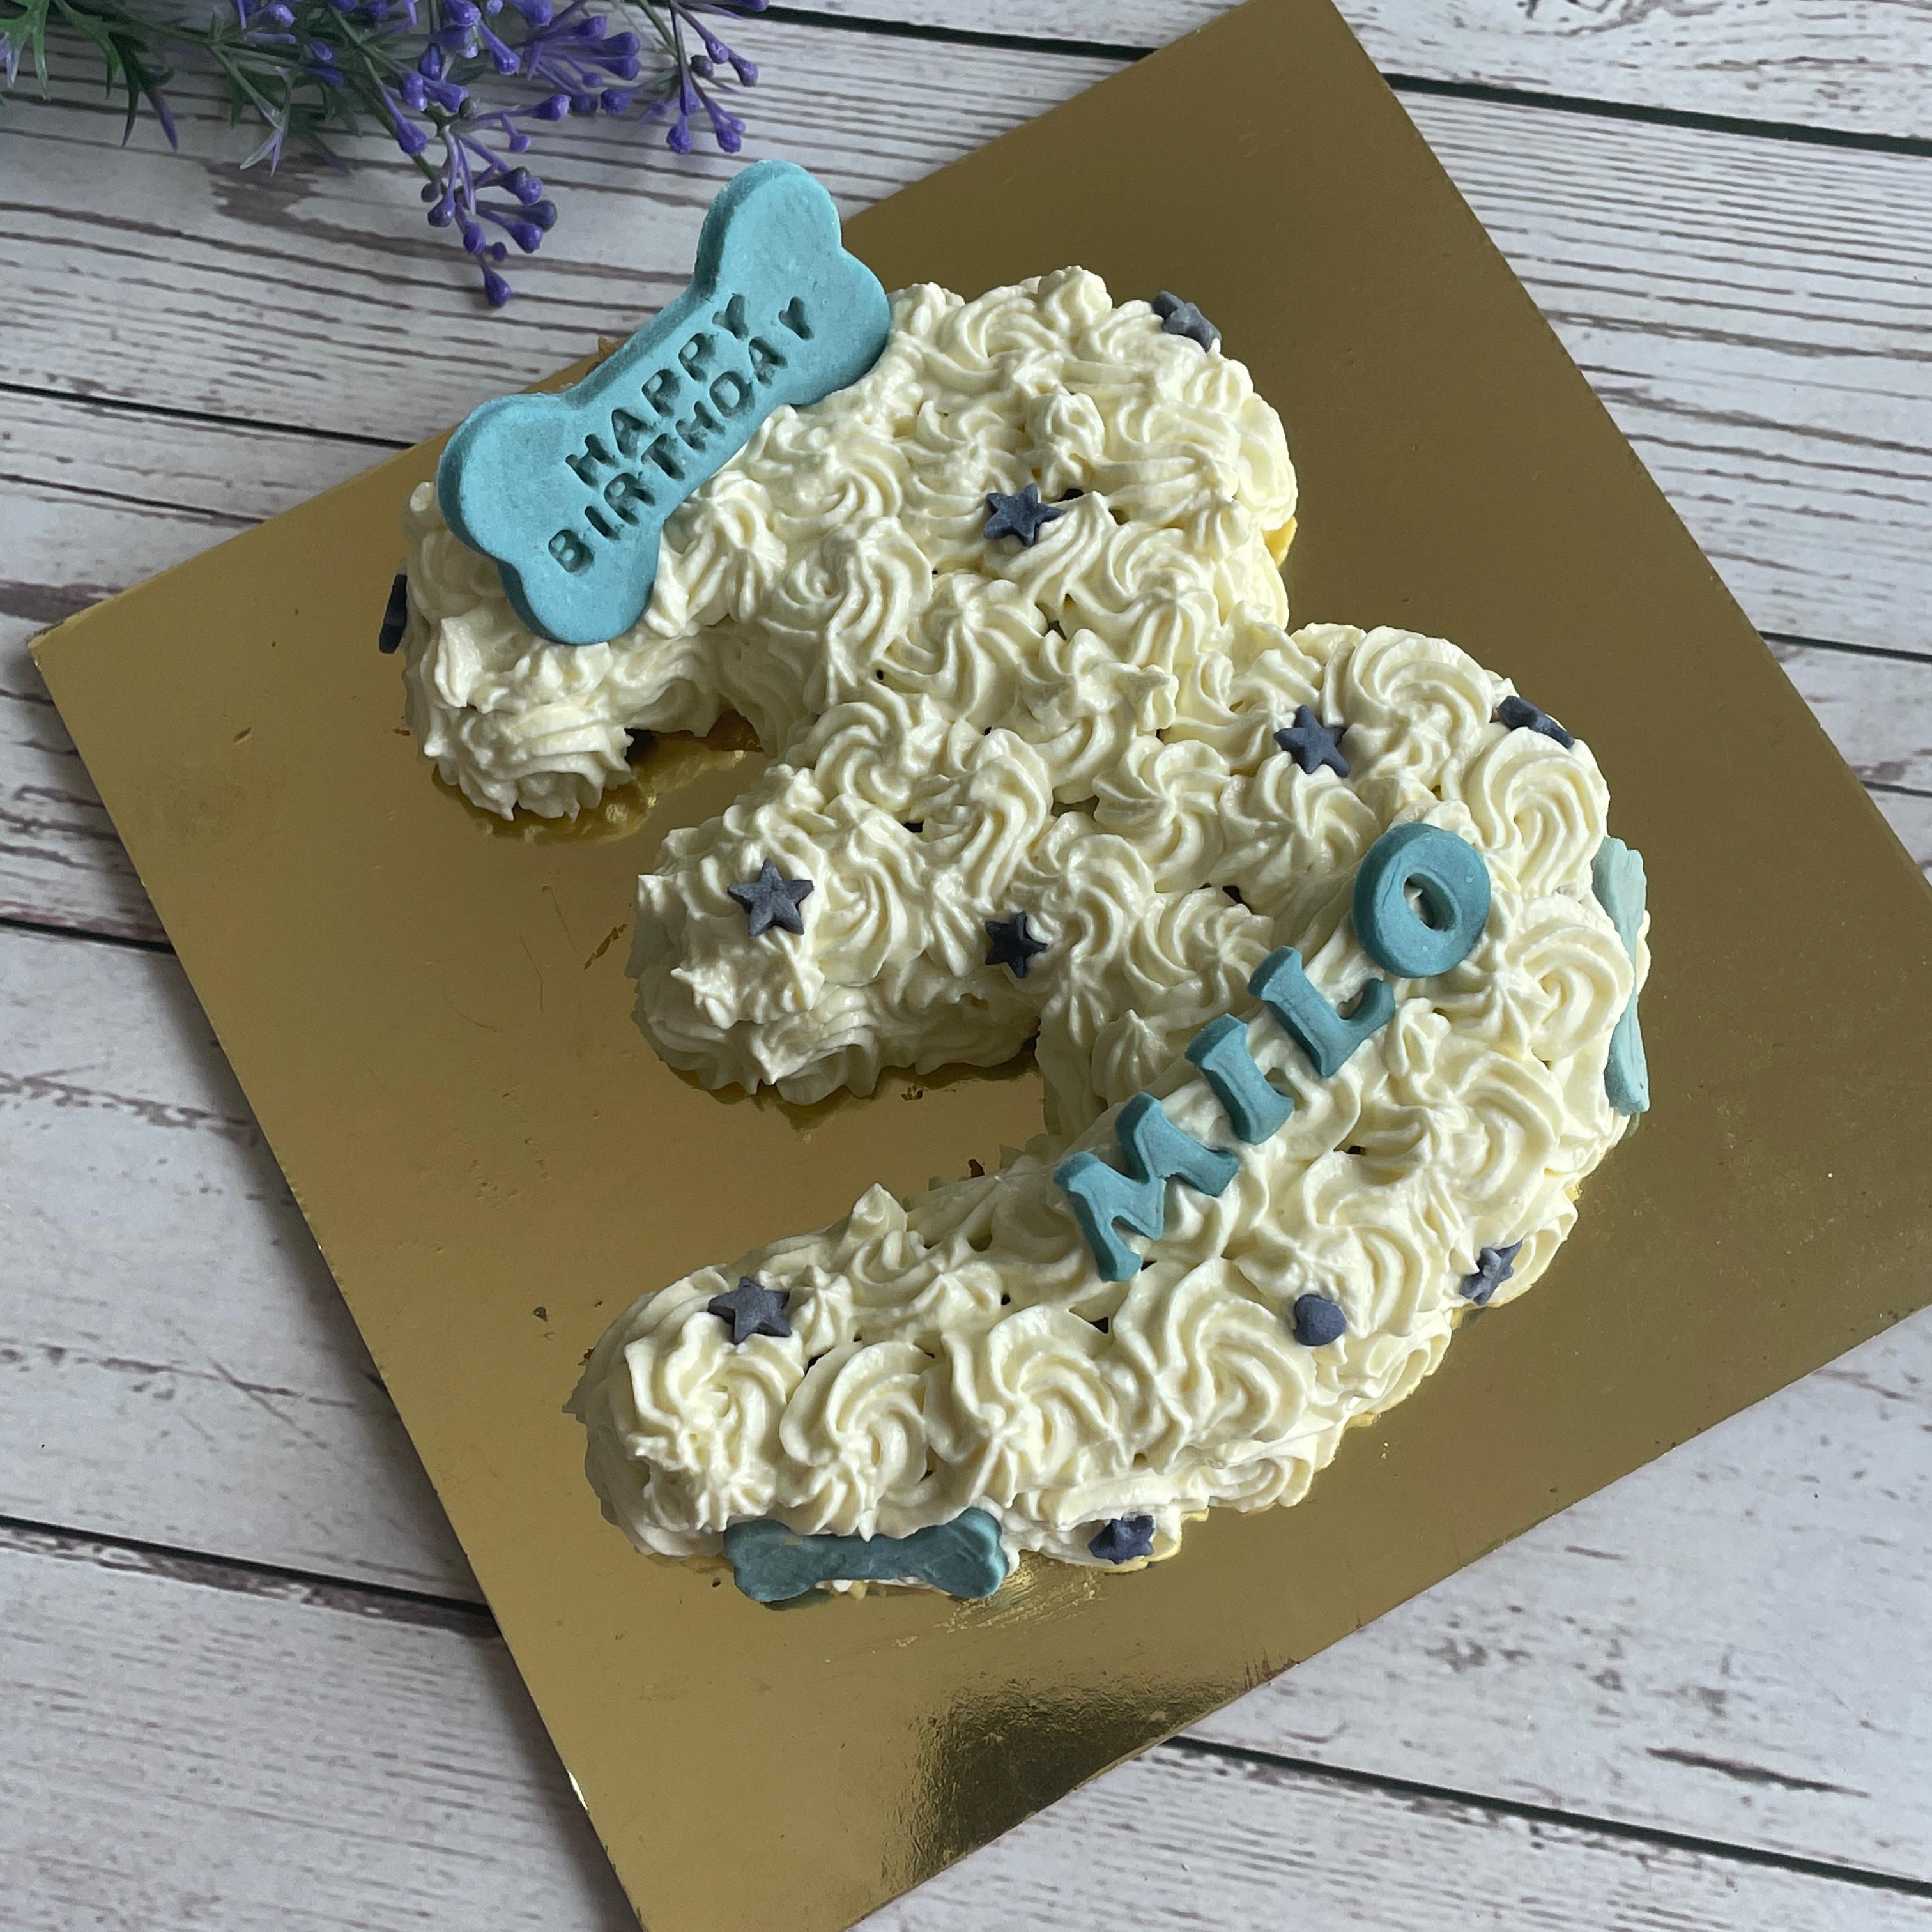 How to Make a Number Cake Easy Recipe + Tips